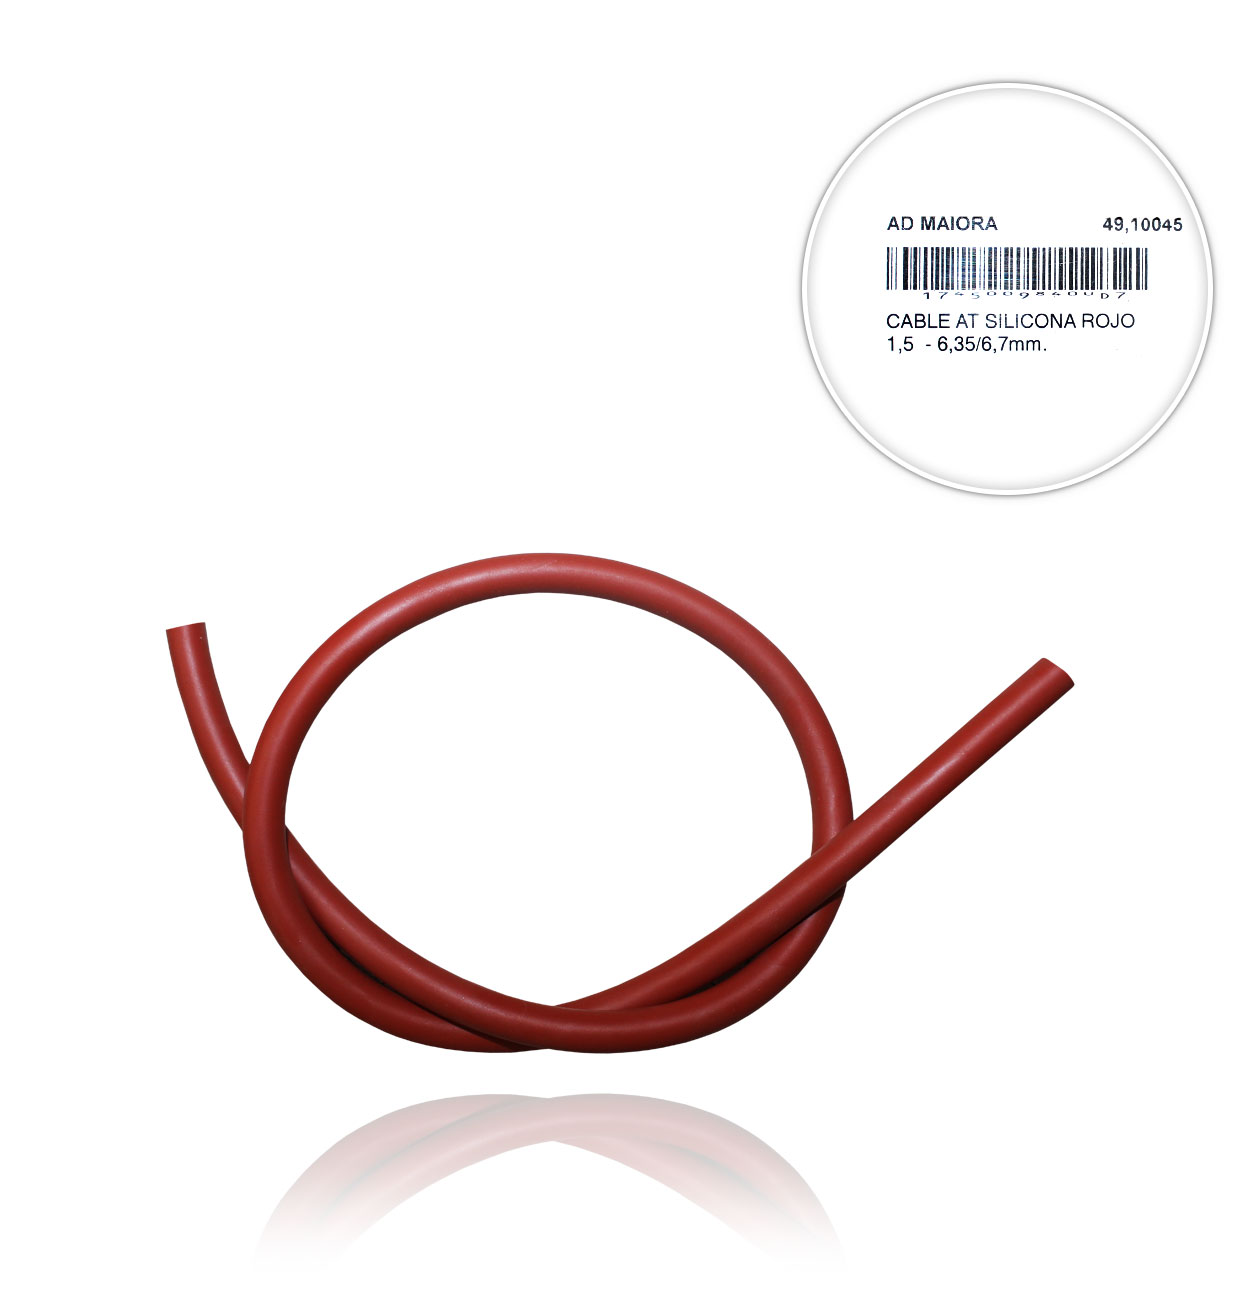 AT SILICONE RED CABLE 1.5  - 6.35/6.7mm.